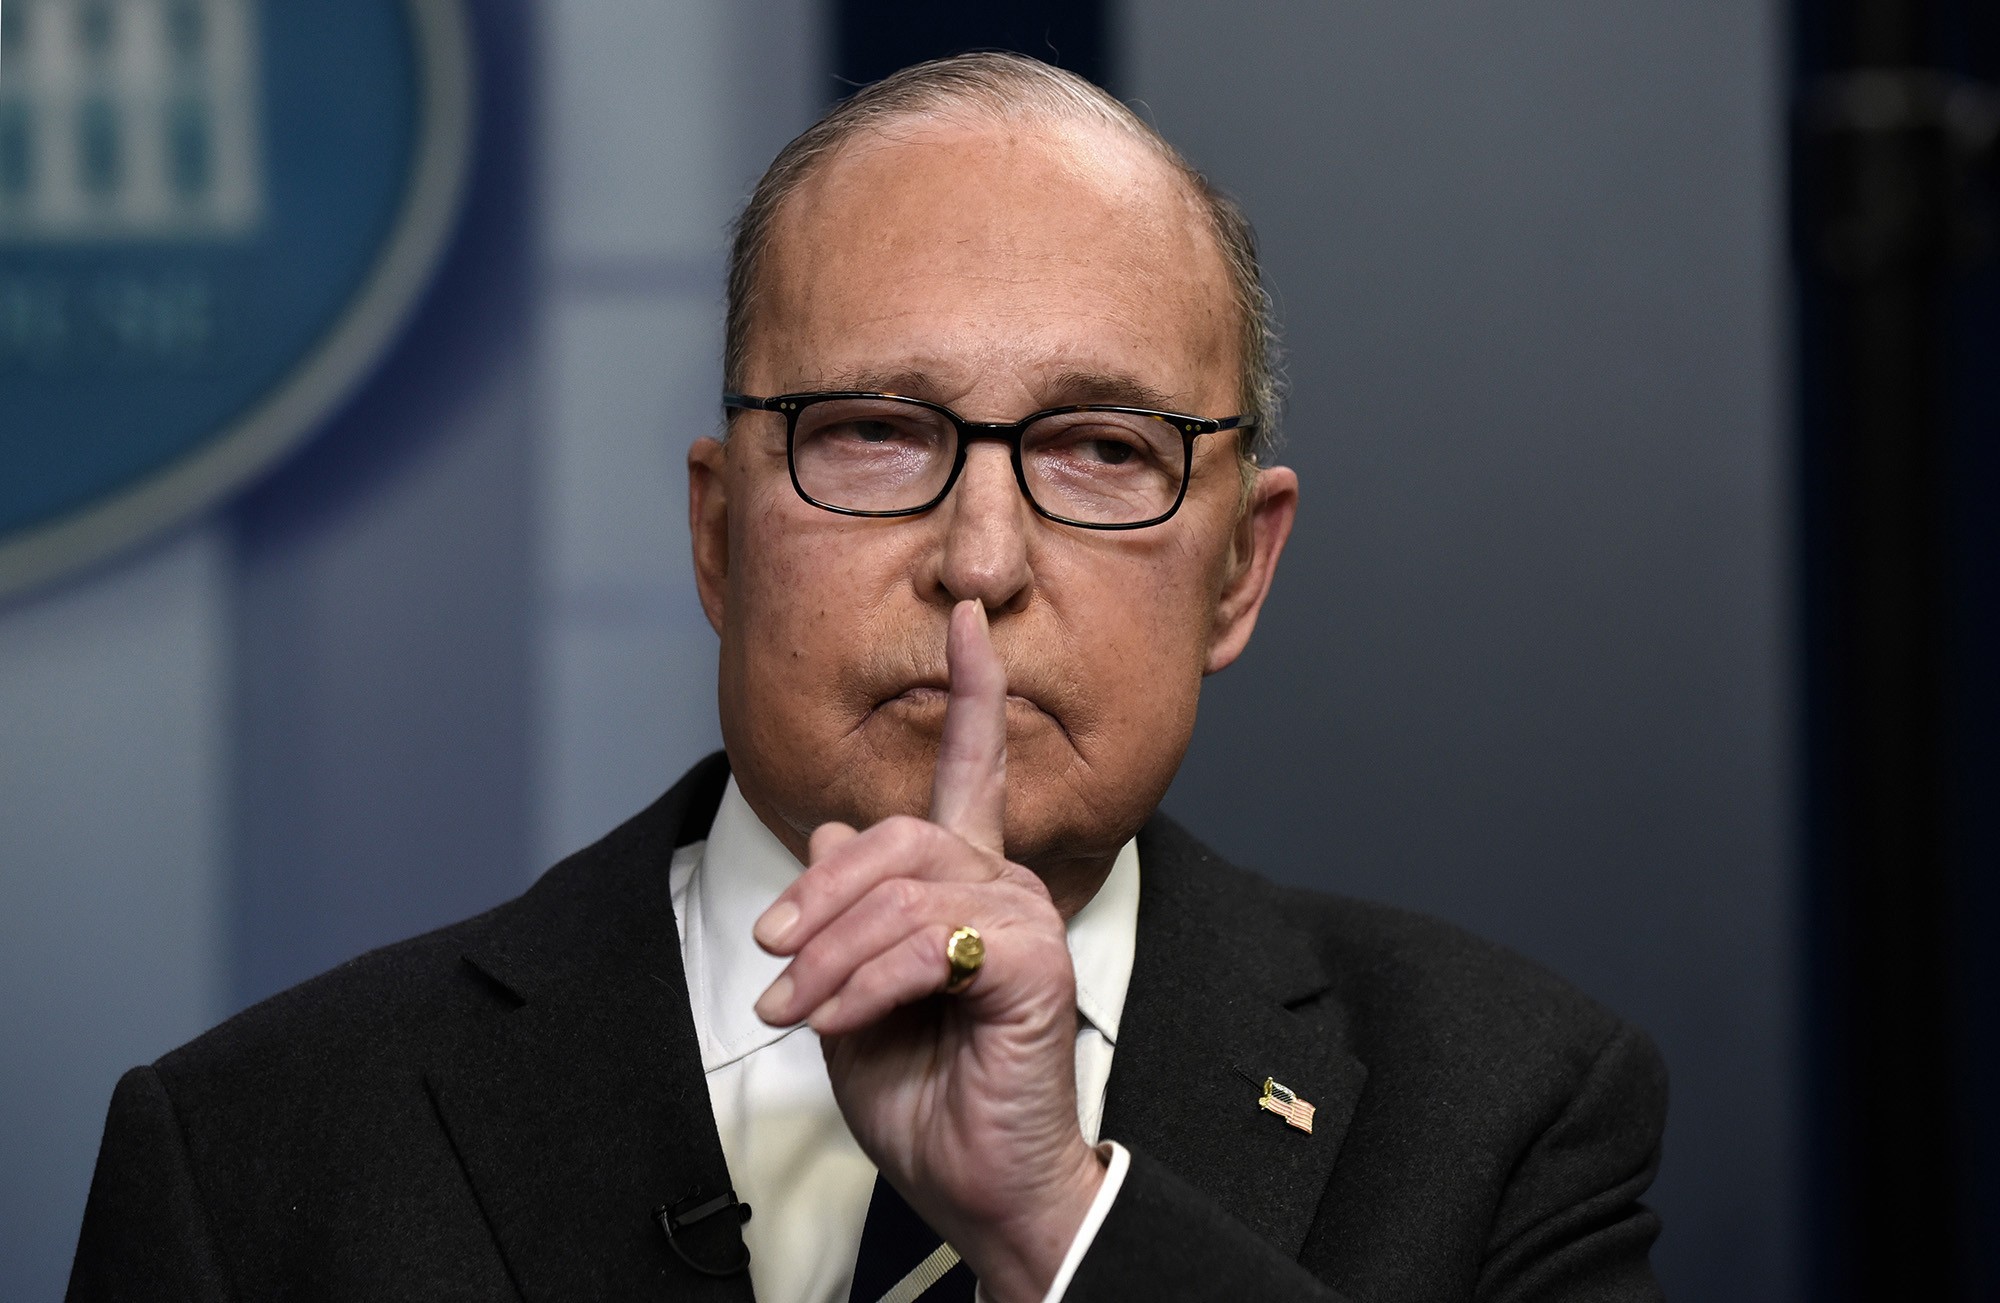 White House economic adviser Larry Kudlow discusses the US’ trade negotiations with China on January 22. Photo: Abaca Press/TNS